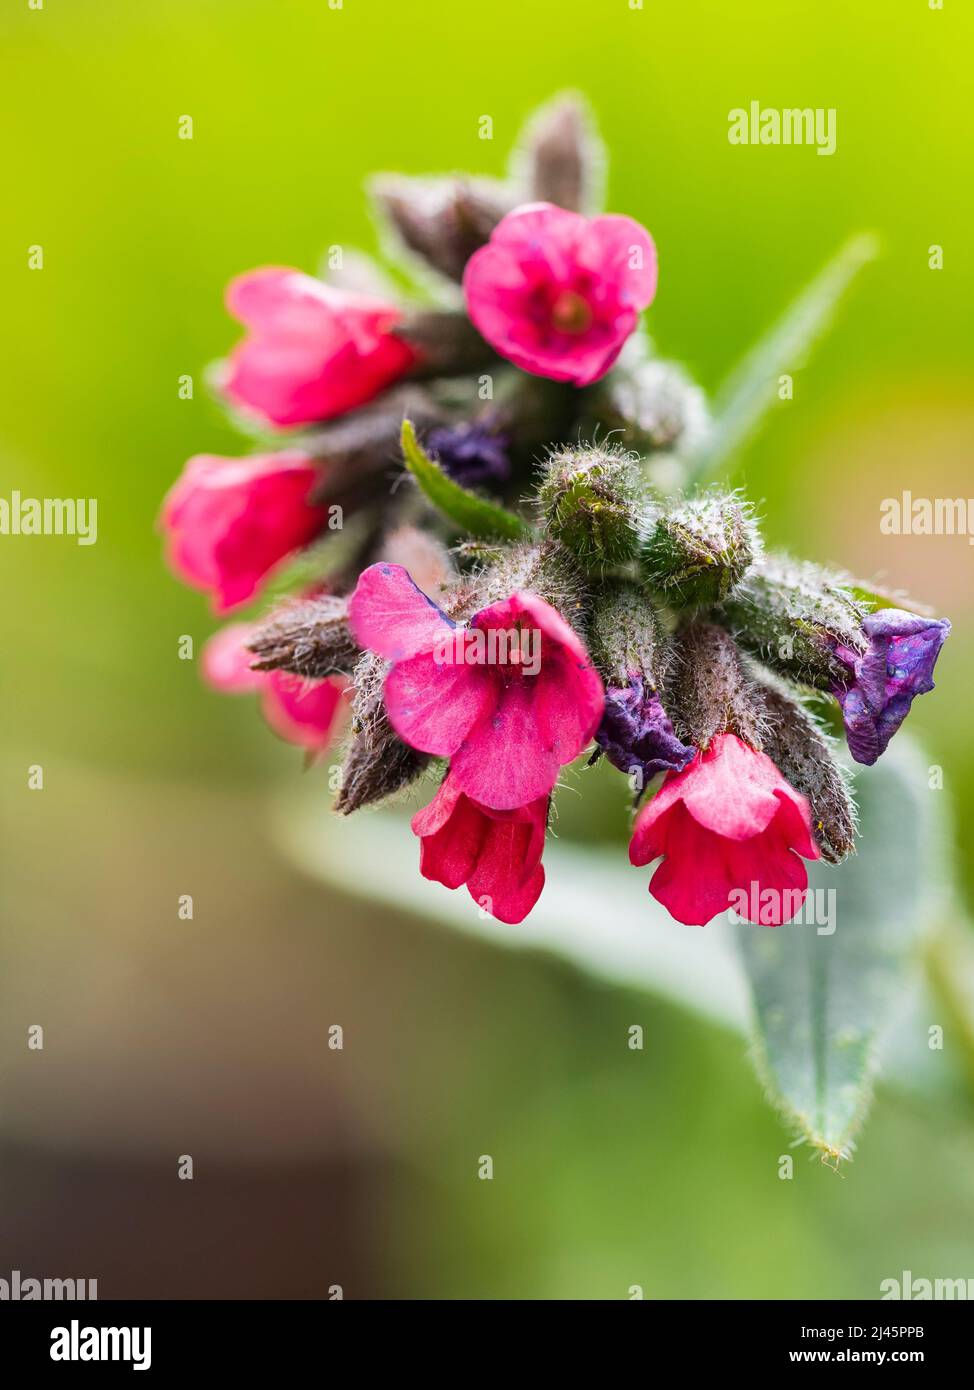 Red flowers and silver spotted leaves of the early spring flowering hardy lungwort, Pulmonaria saccharata 'Raspberry Splash' Stock Photo